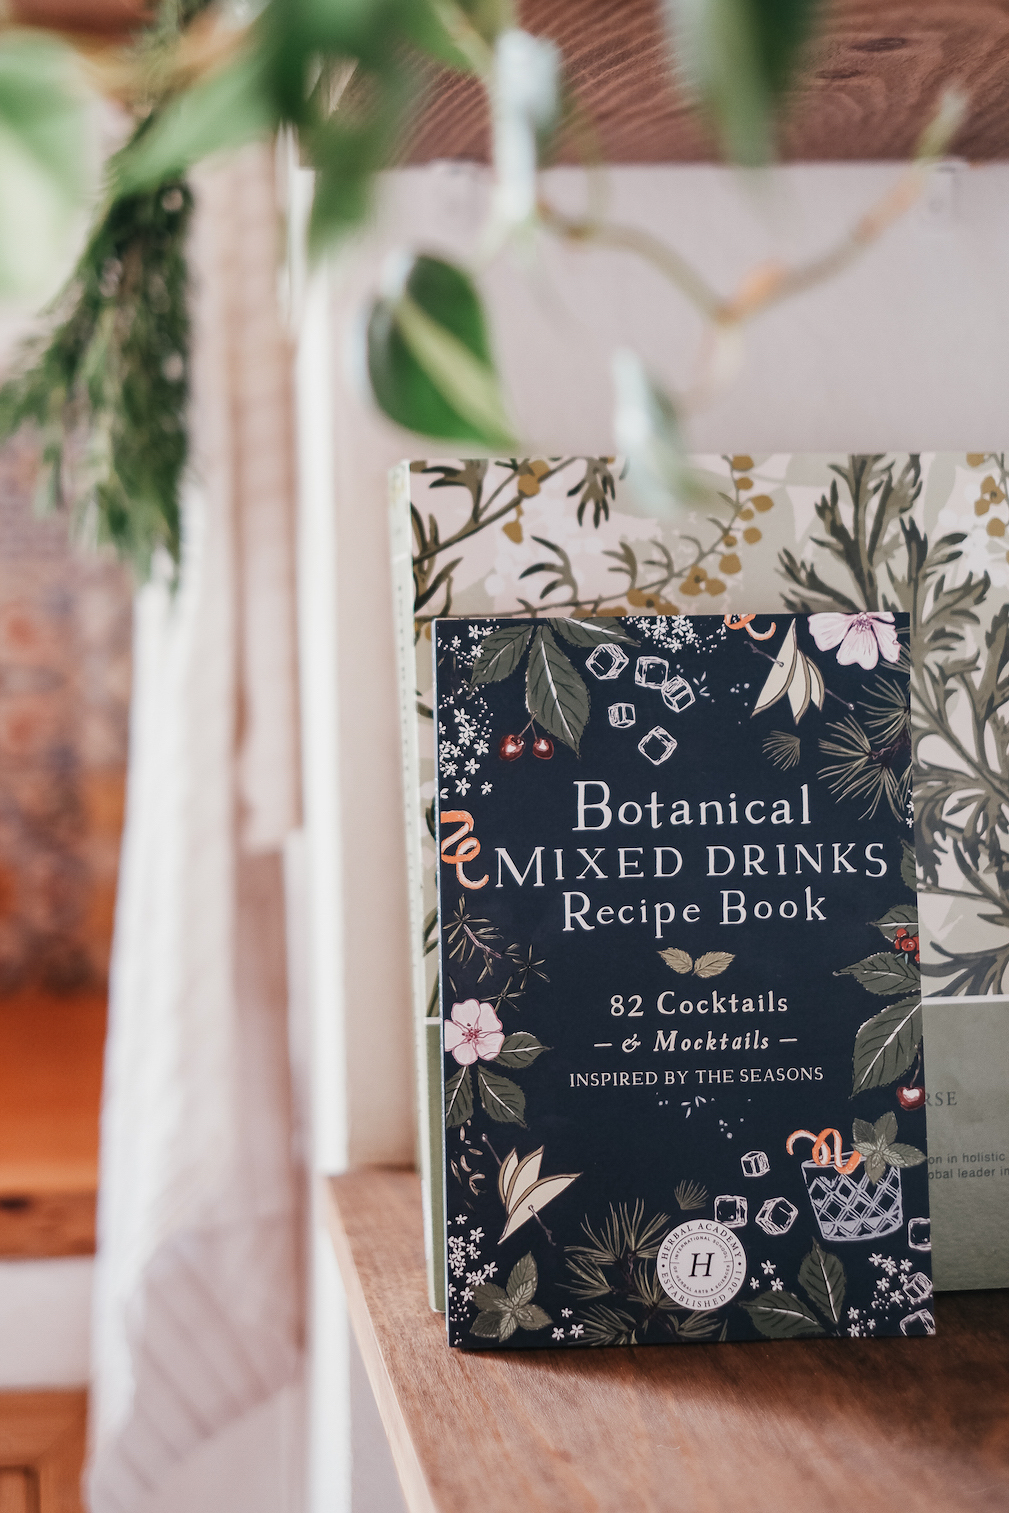 Botanical Mixed Drinks Recipe book by Herbal academy